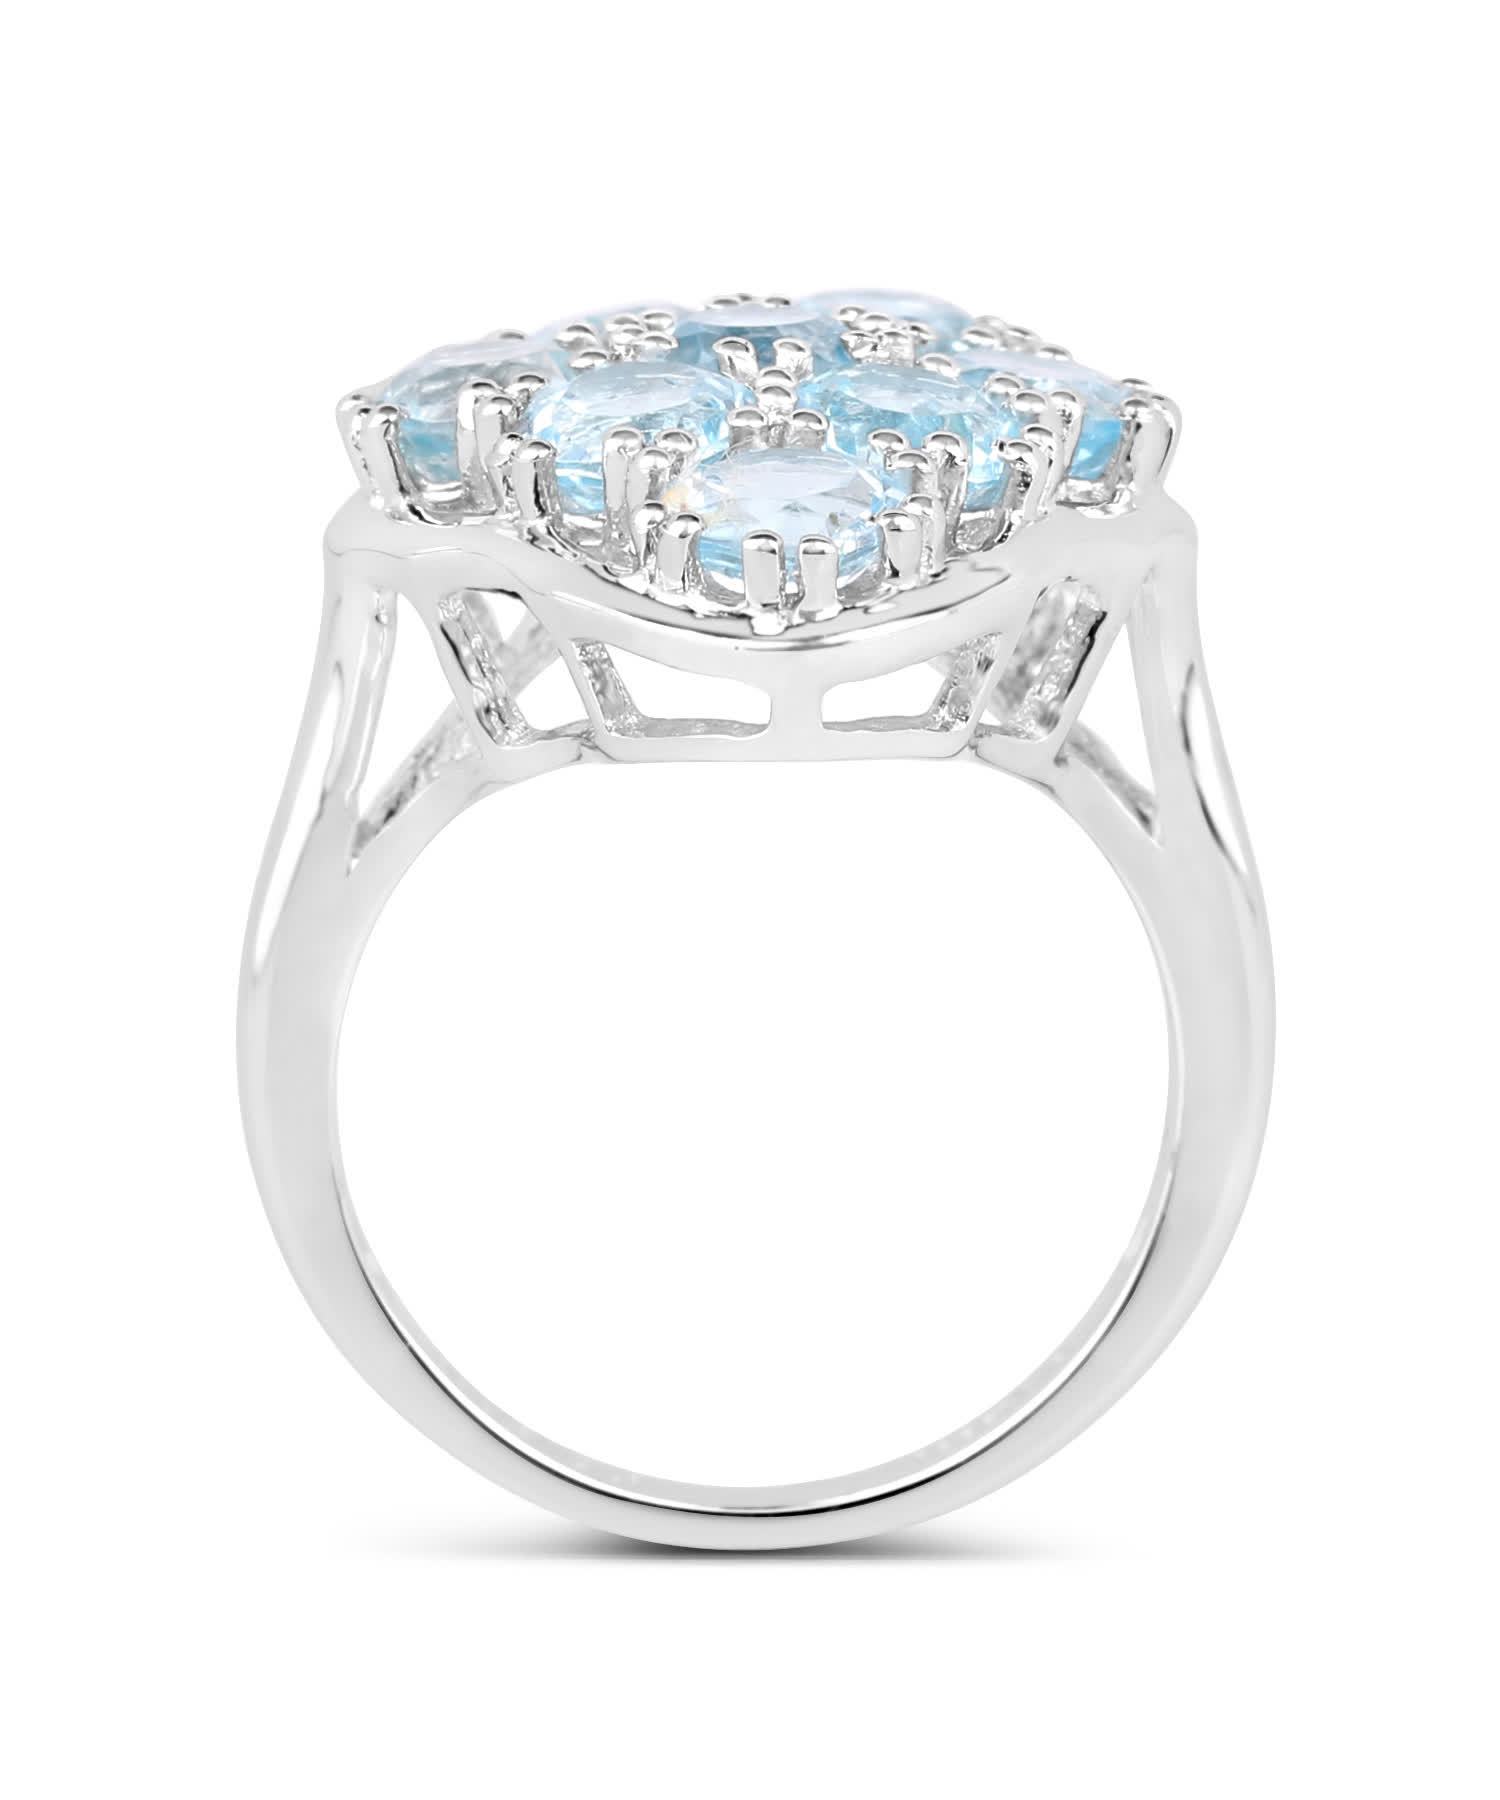 5.40ctw Natural Sky Blue Topaz Rhodium Plated 925 Sterling Silver Right Hand Ring View 2